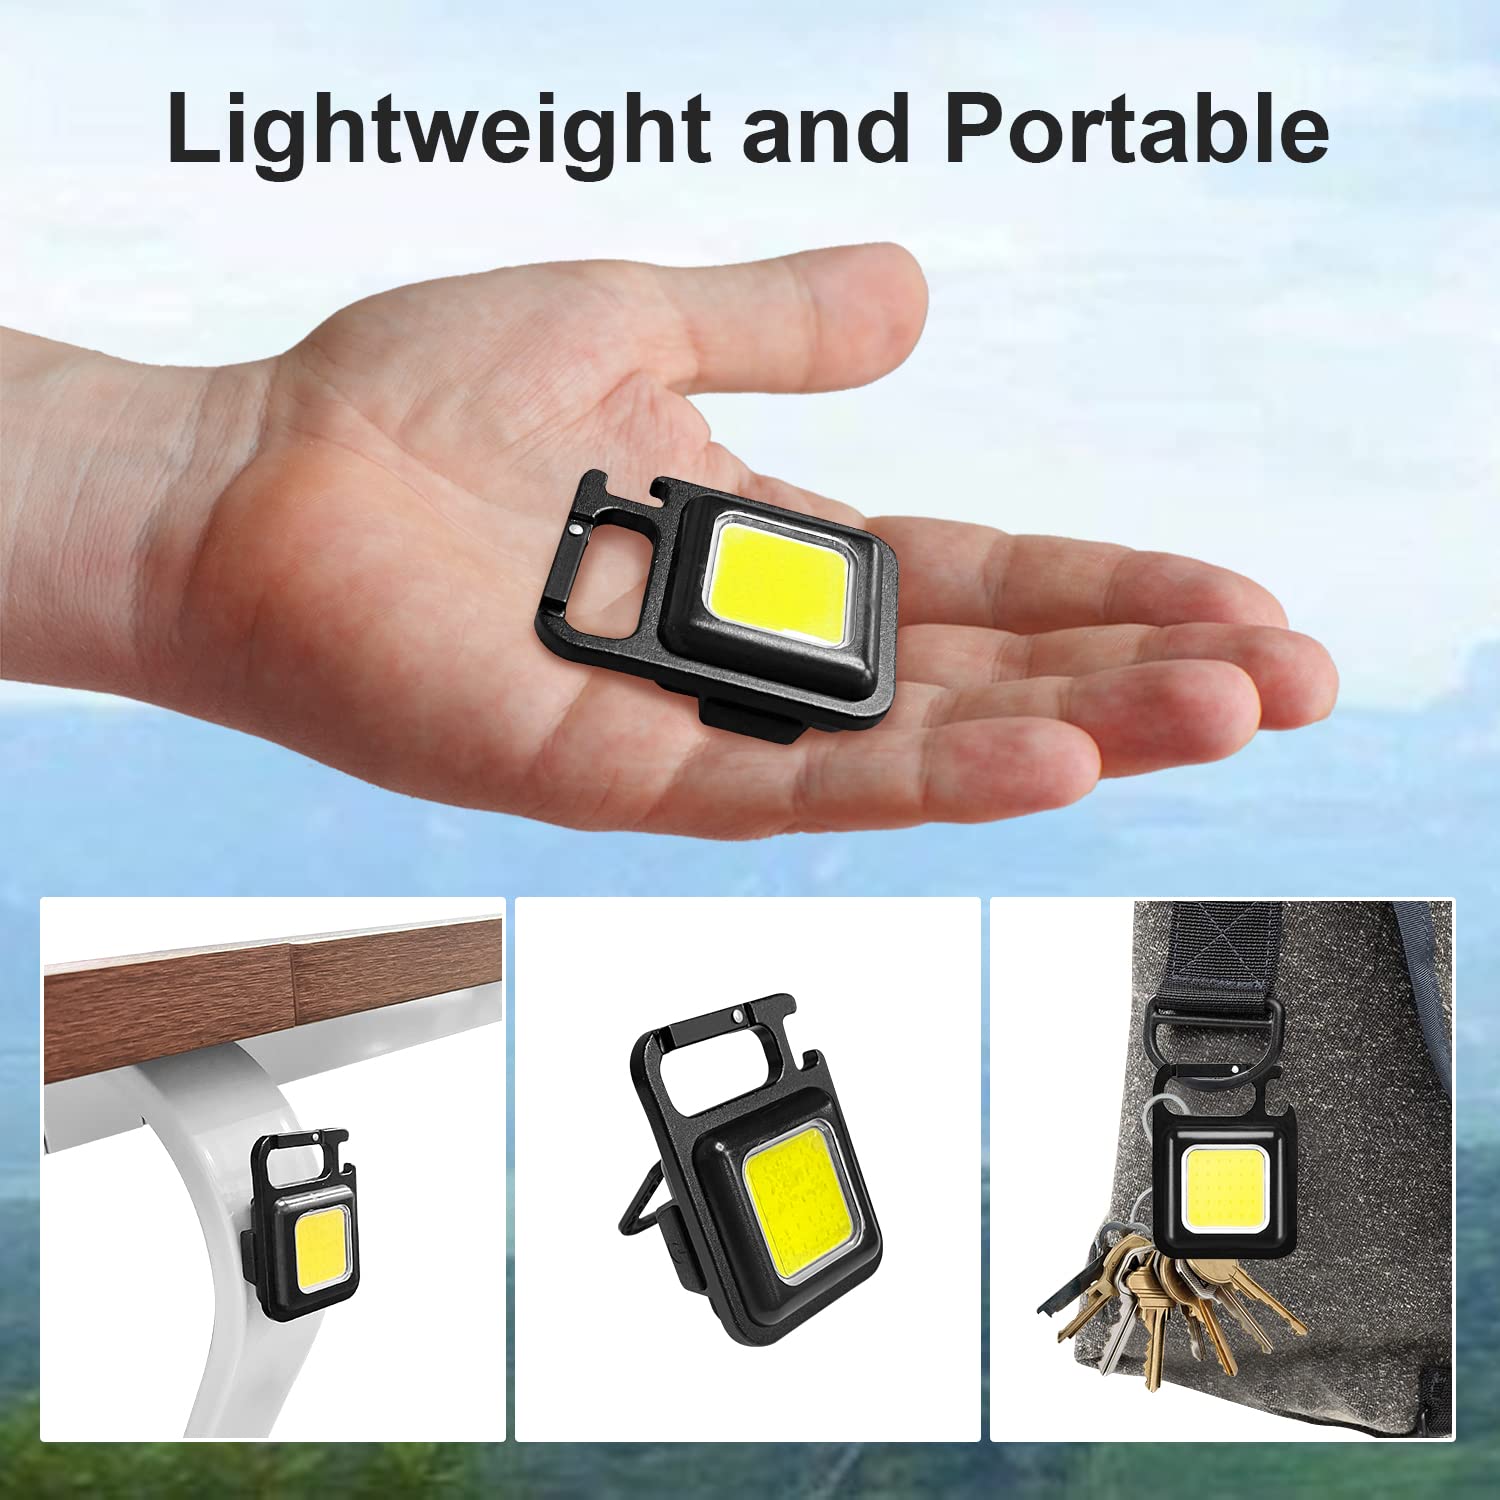 4108 Plastic Rechargeable Keychain Mini Flashlight with 4 Light Modes, Ultralight Portable Pocket Light with Folding Bracket Bottle Opener and Magnet Base for Camping Walking